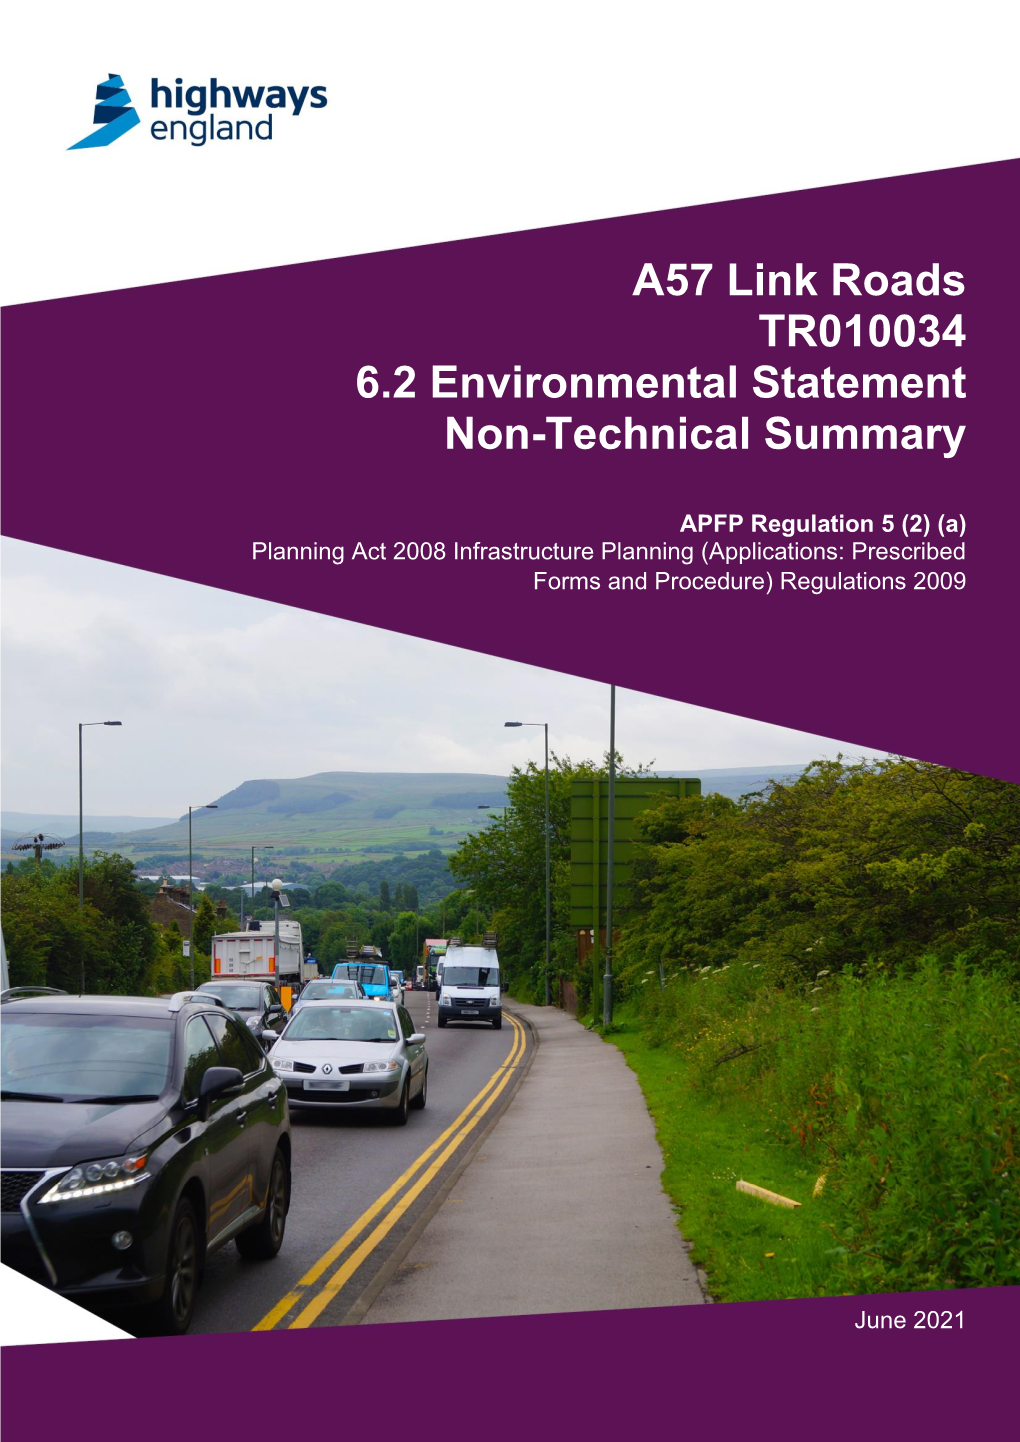 A57 Link Roads TR010034 6.2 Environmental Statement Non-Technical Summary